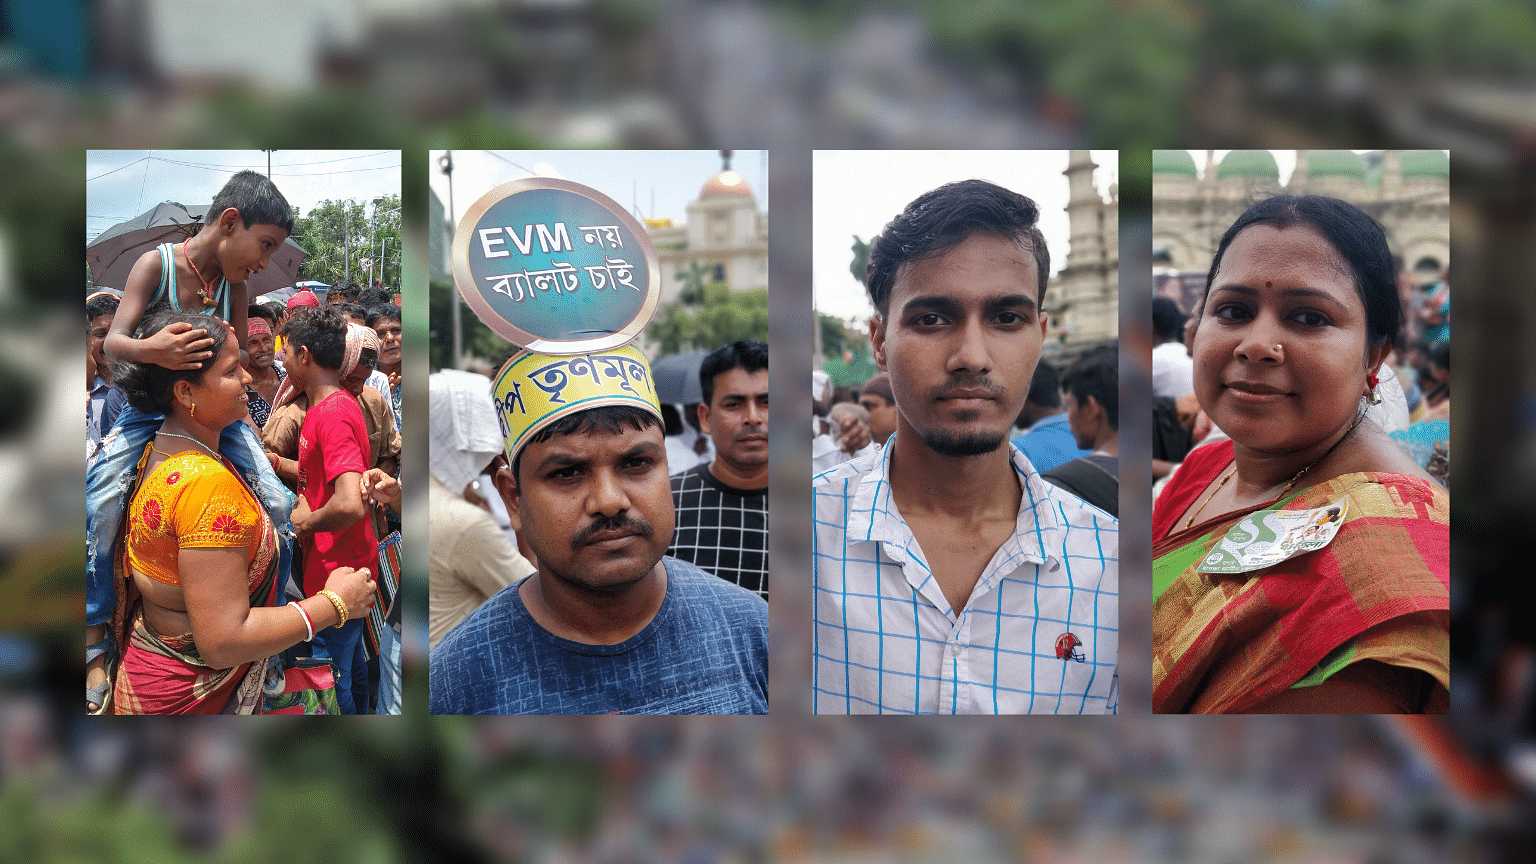 Trinamool workers from across the state open up about the looming challenge from the BJP and Mamata’s chances of re-election in 2021.